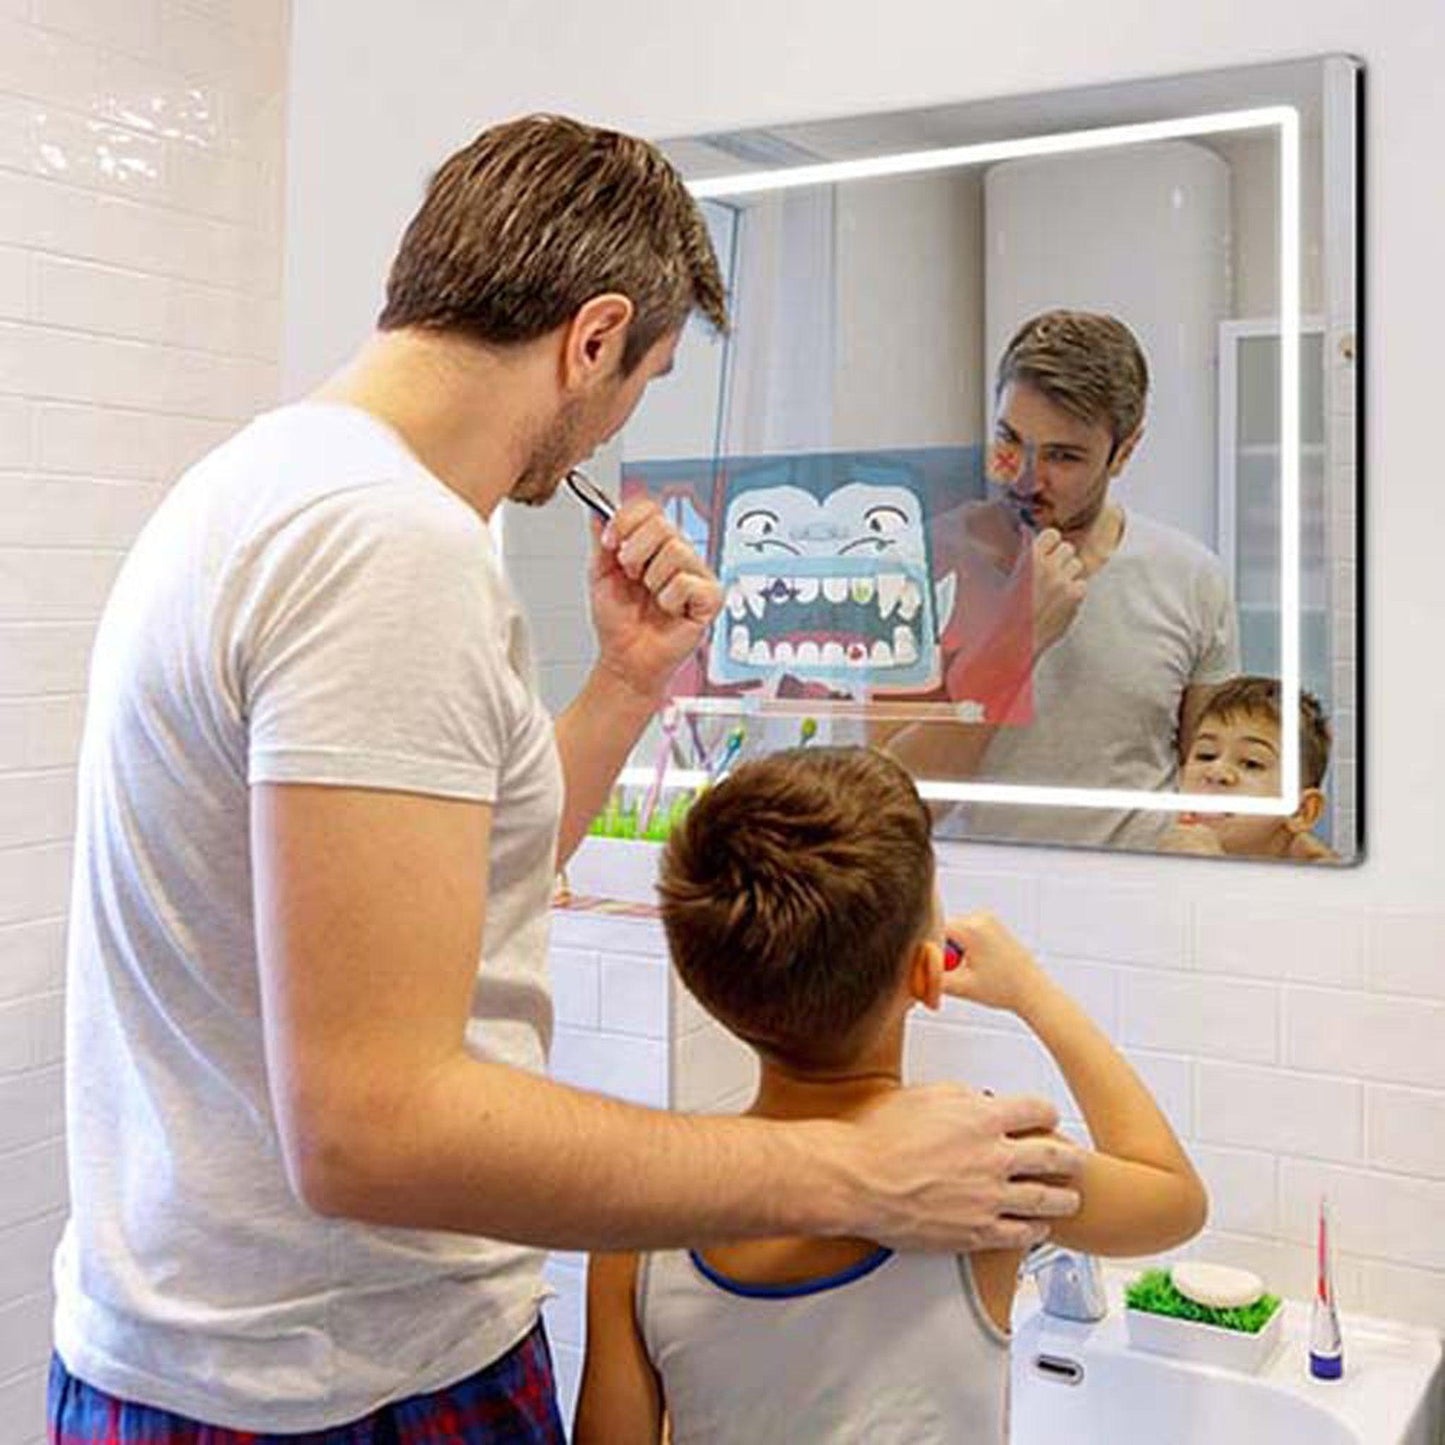 Aquadom Vision 48" x 32" Smart LED Lighted Bathroom Mirror With Built-in TV and Defogger